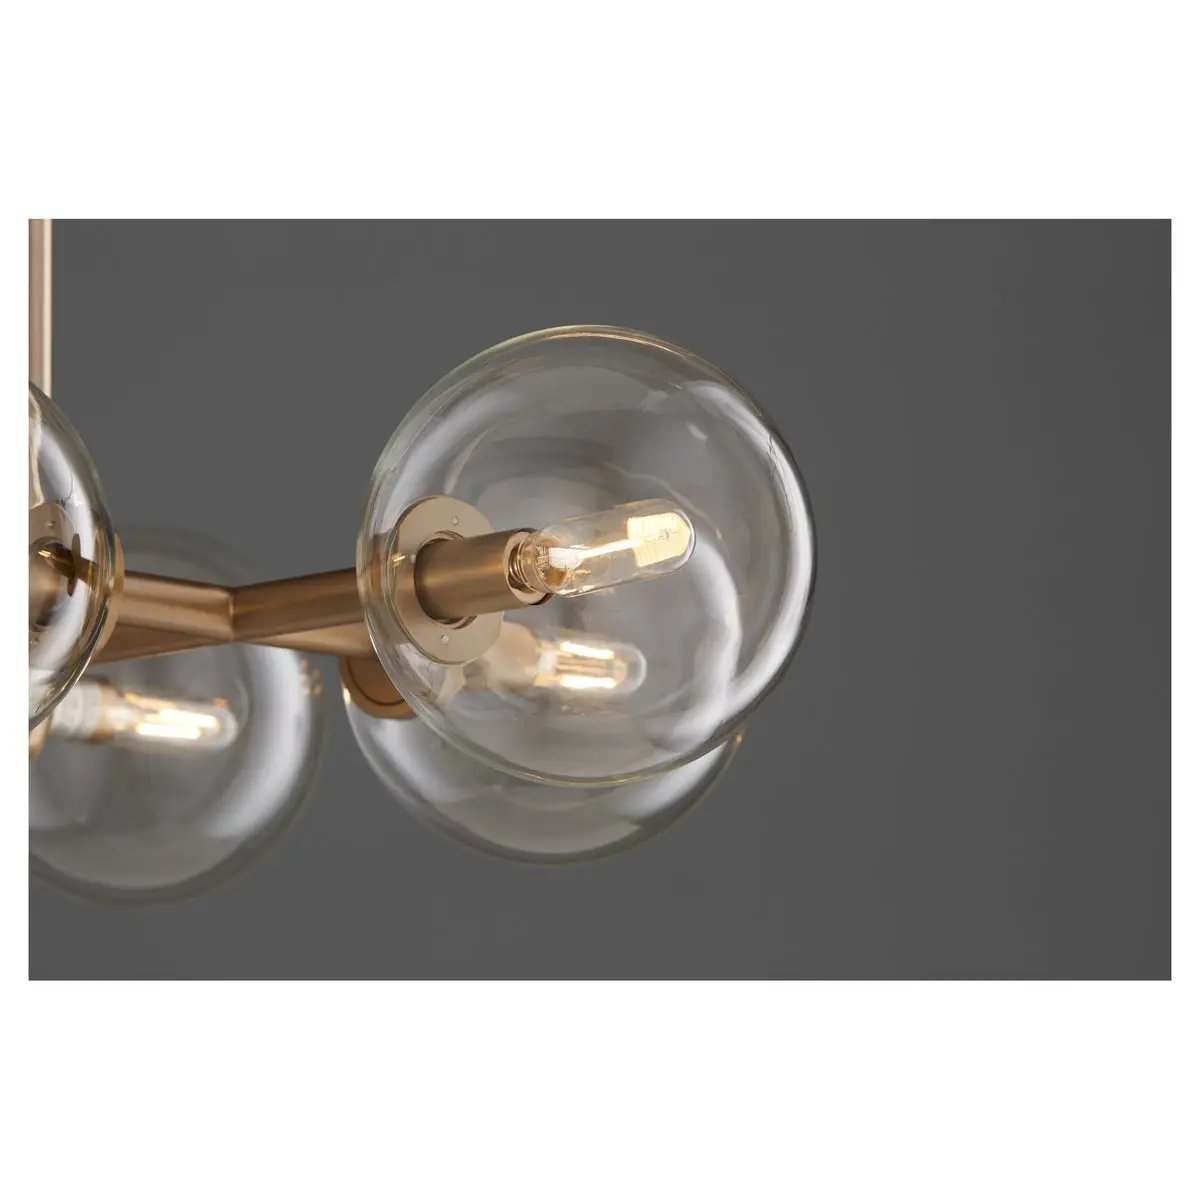 Linear Sputnik Chandelier with clear glass domes and aged brass frames, creating a mid-century modern appeal. 8 bulbs, 60W, dimmable. UL Listed, Damp Location. 18"W x 14"H x 37.5"L. 2-year warranty.